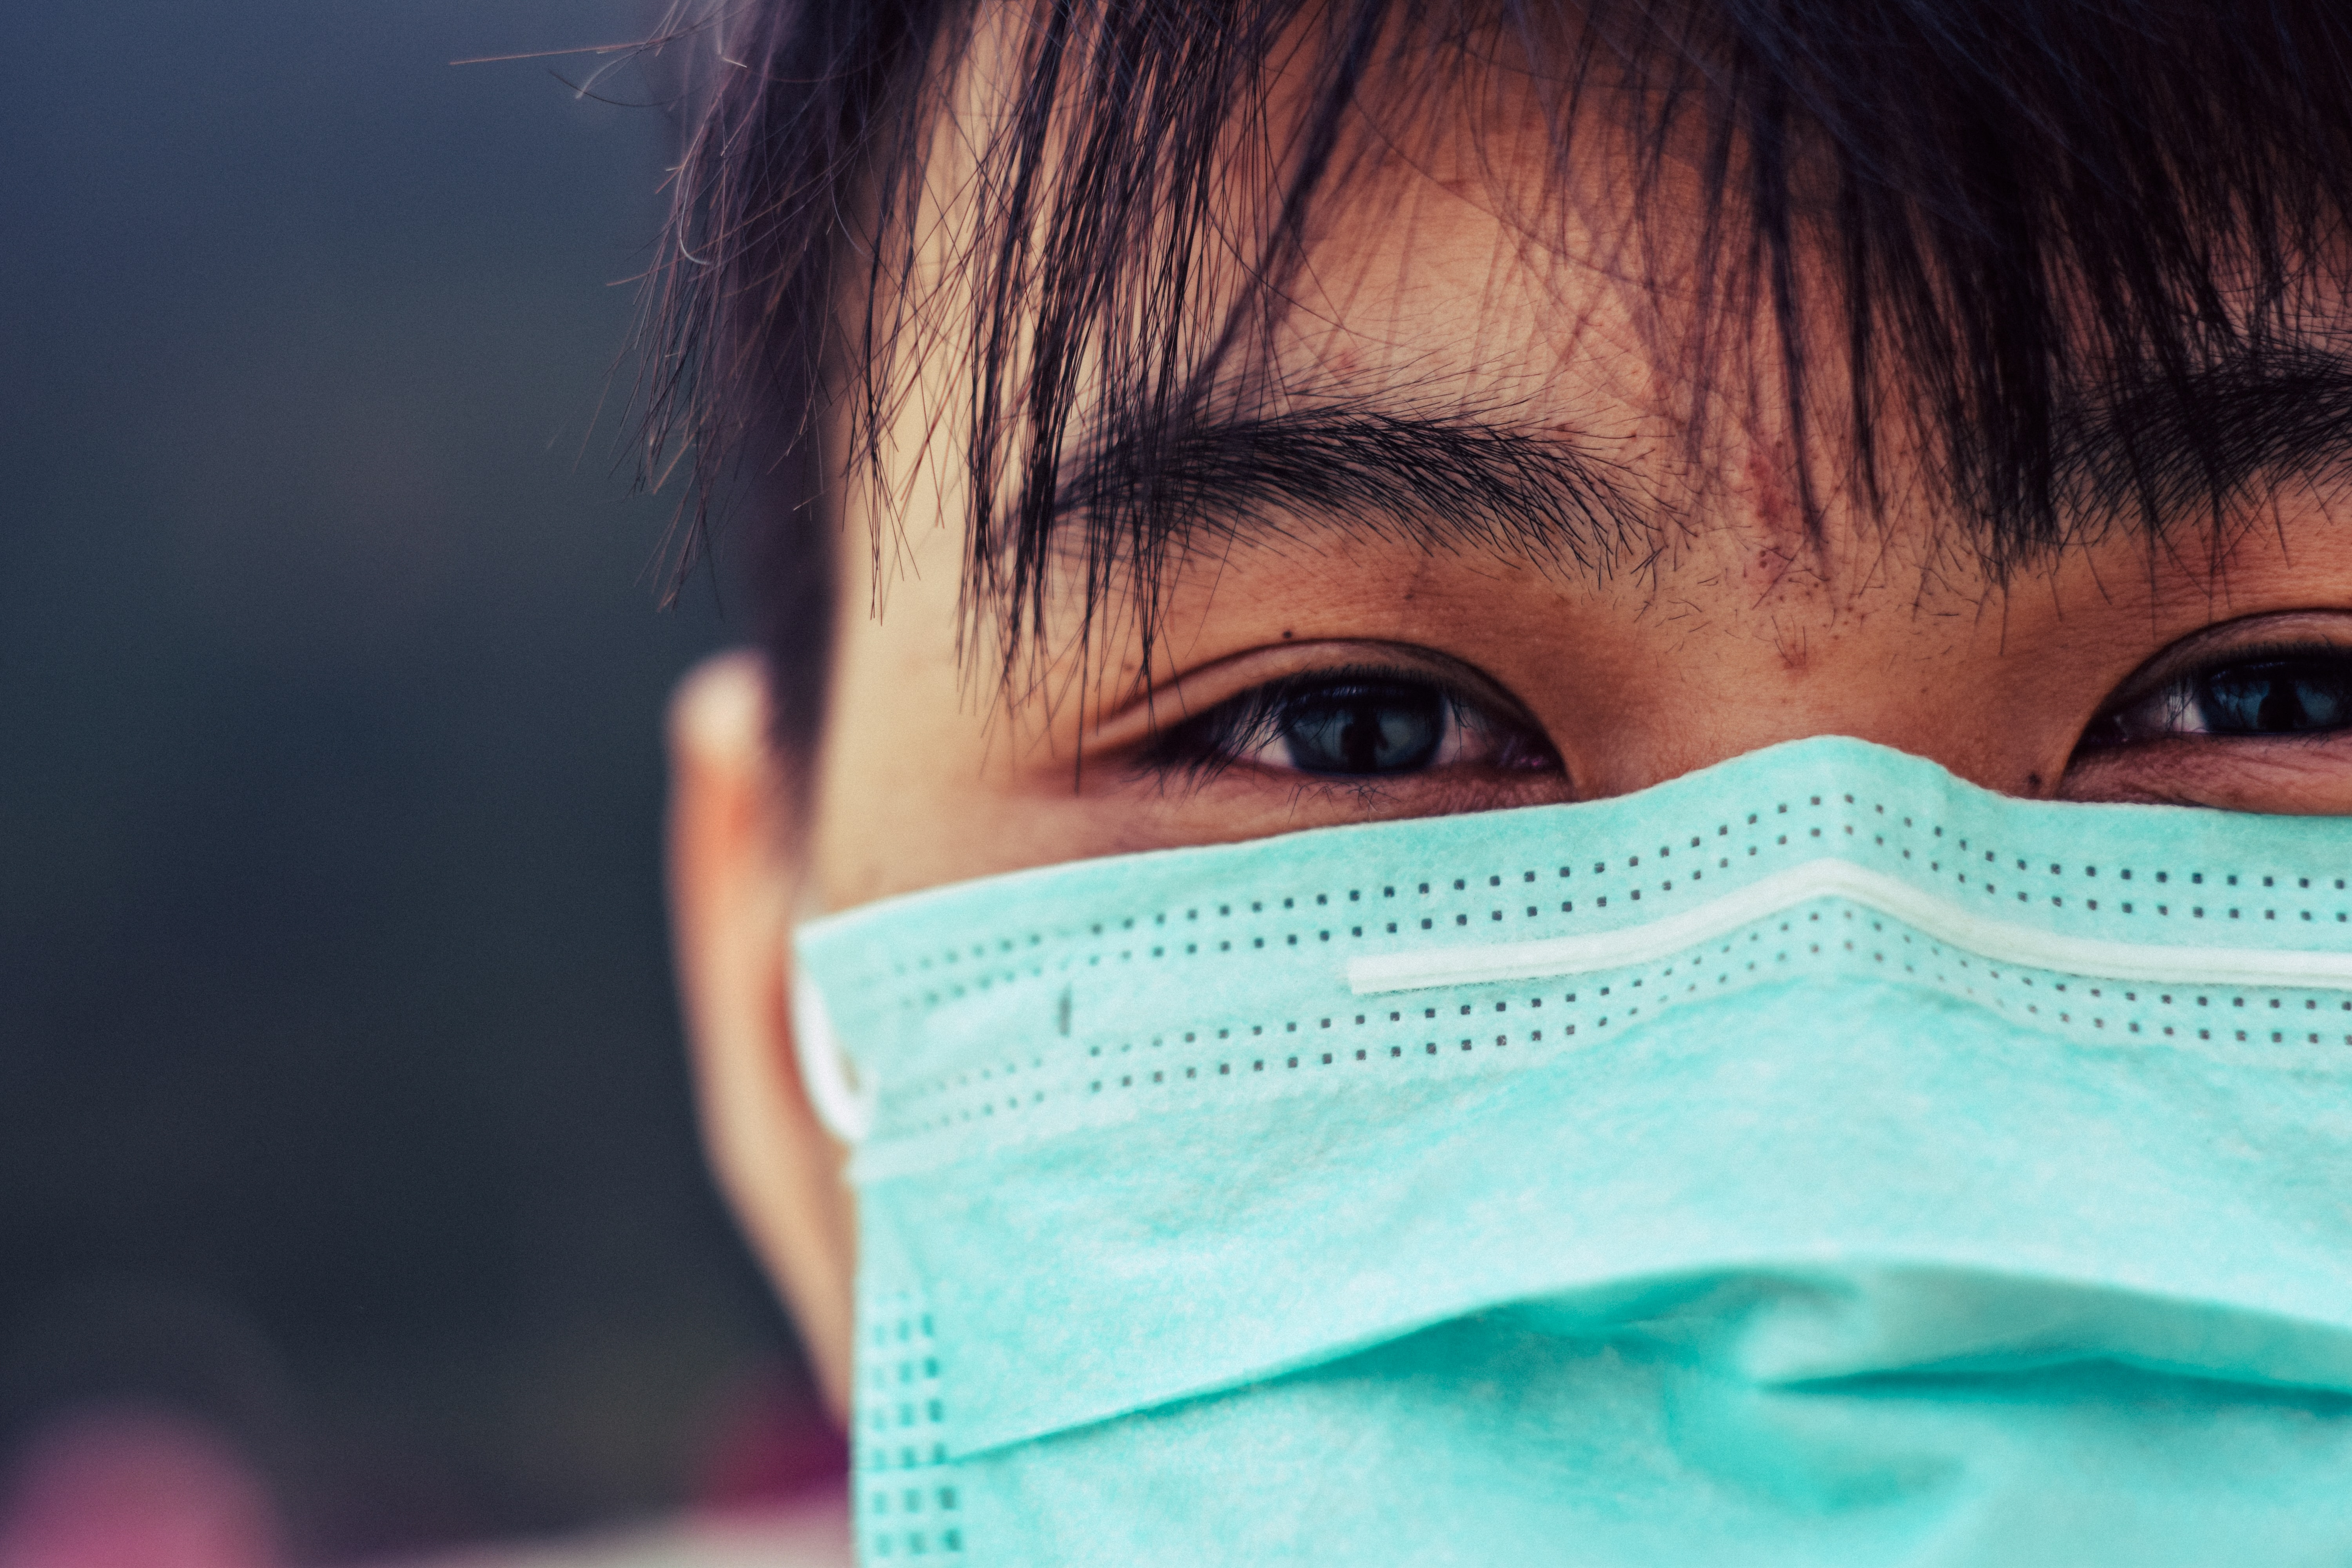 Doctor in surgical mask